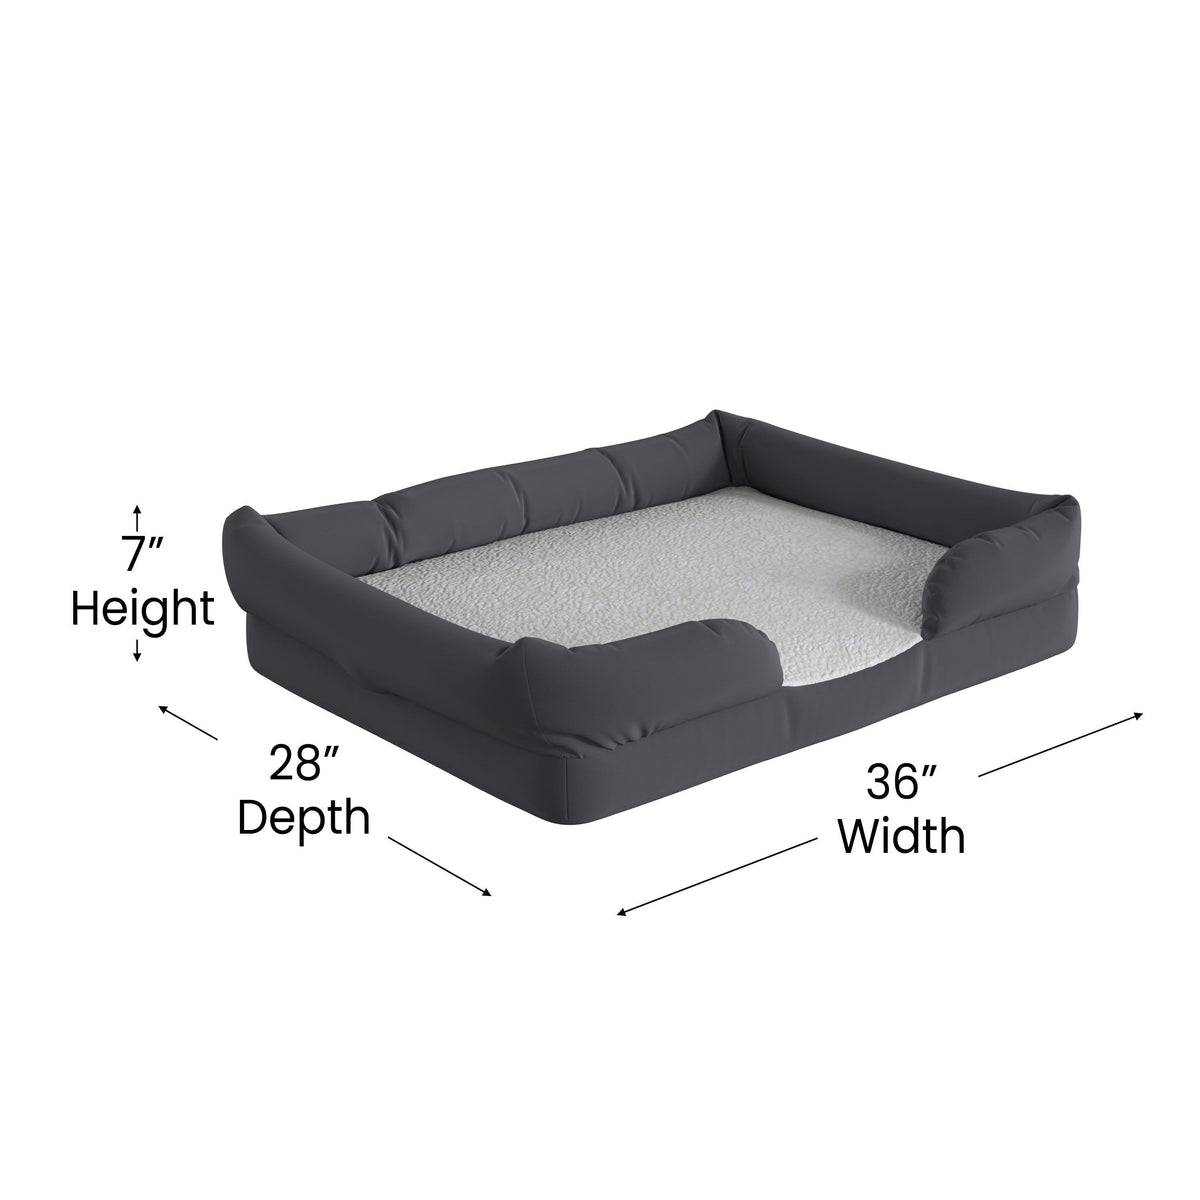 Medium |#| Orthopedic 36inch x 28inch Memory Foam Dog Bed - Removable, Washable Cover-Gray